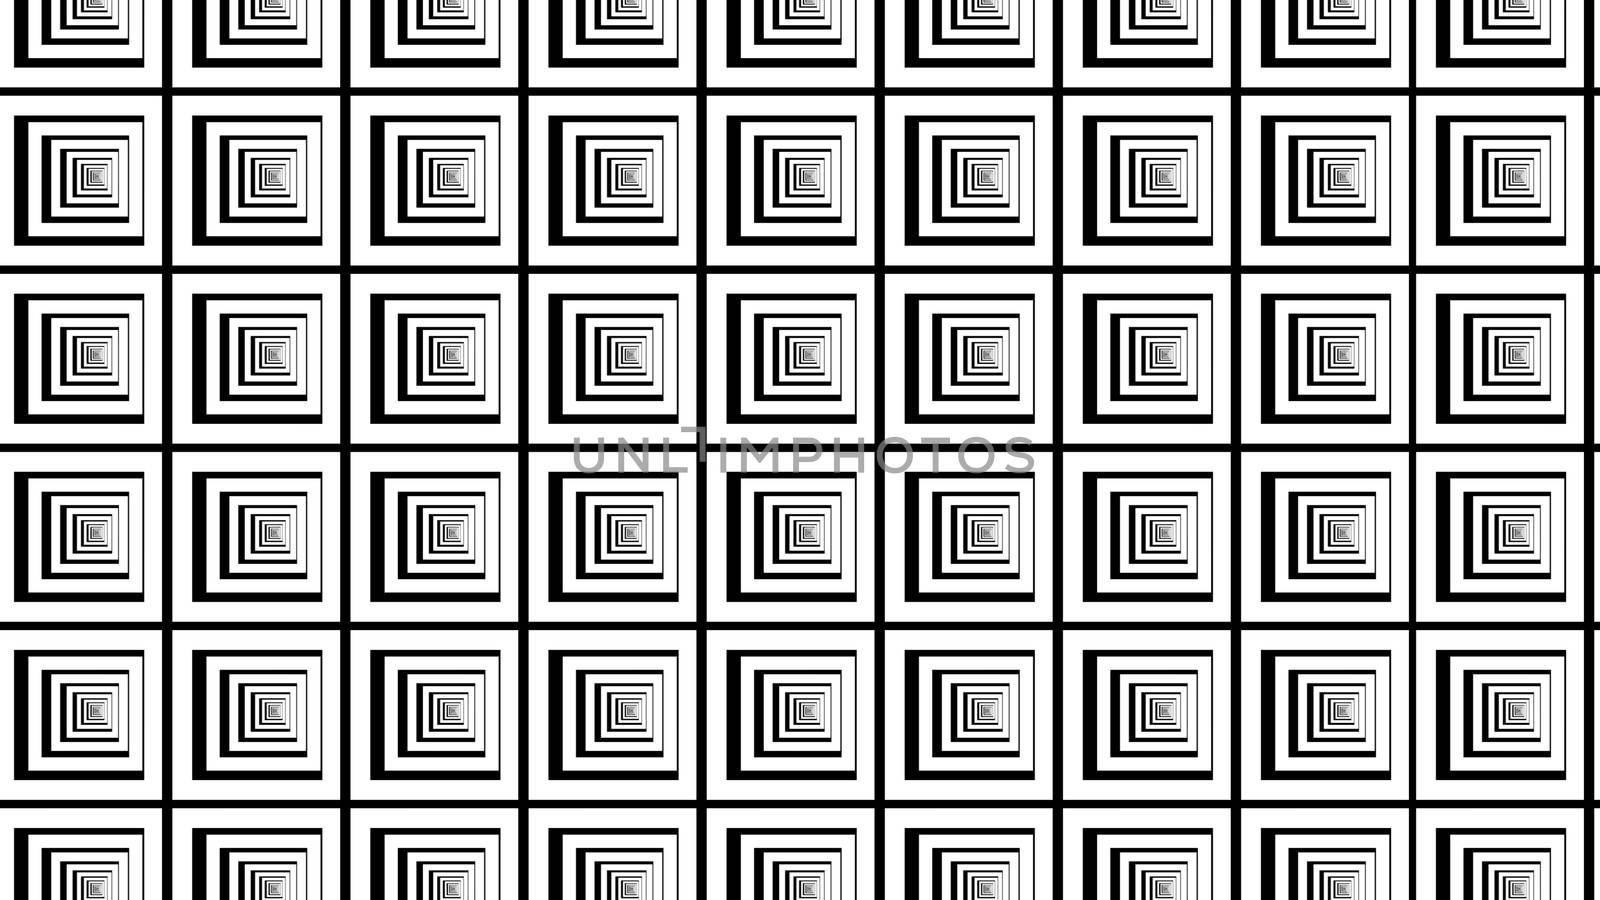 Artistic 3d illustration of straight white and black squares looking like rows of equal labyrinths. They look arty, psychedelic and cheerful.